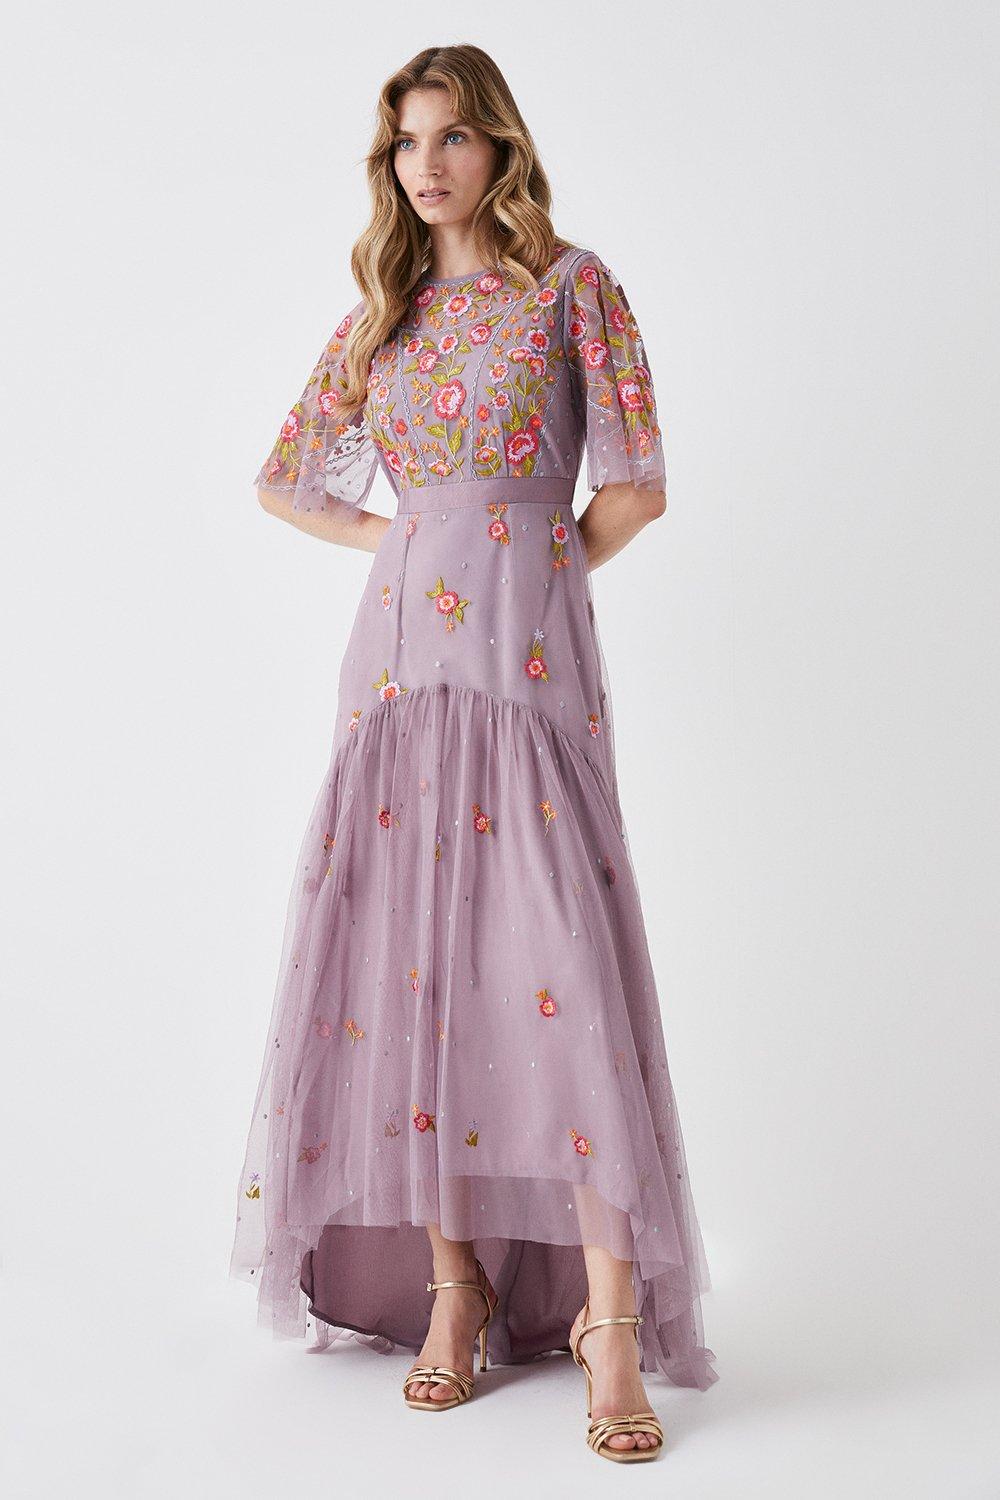 Panelled Skirt Hand Embroidered Maxi Dress